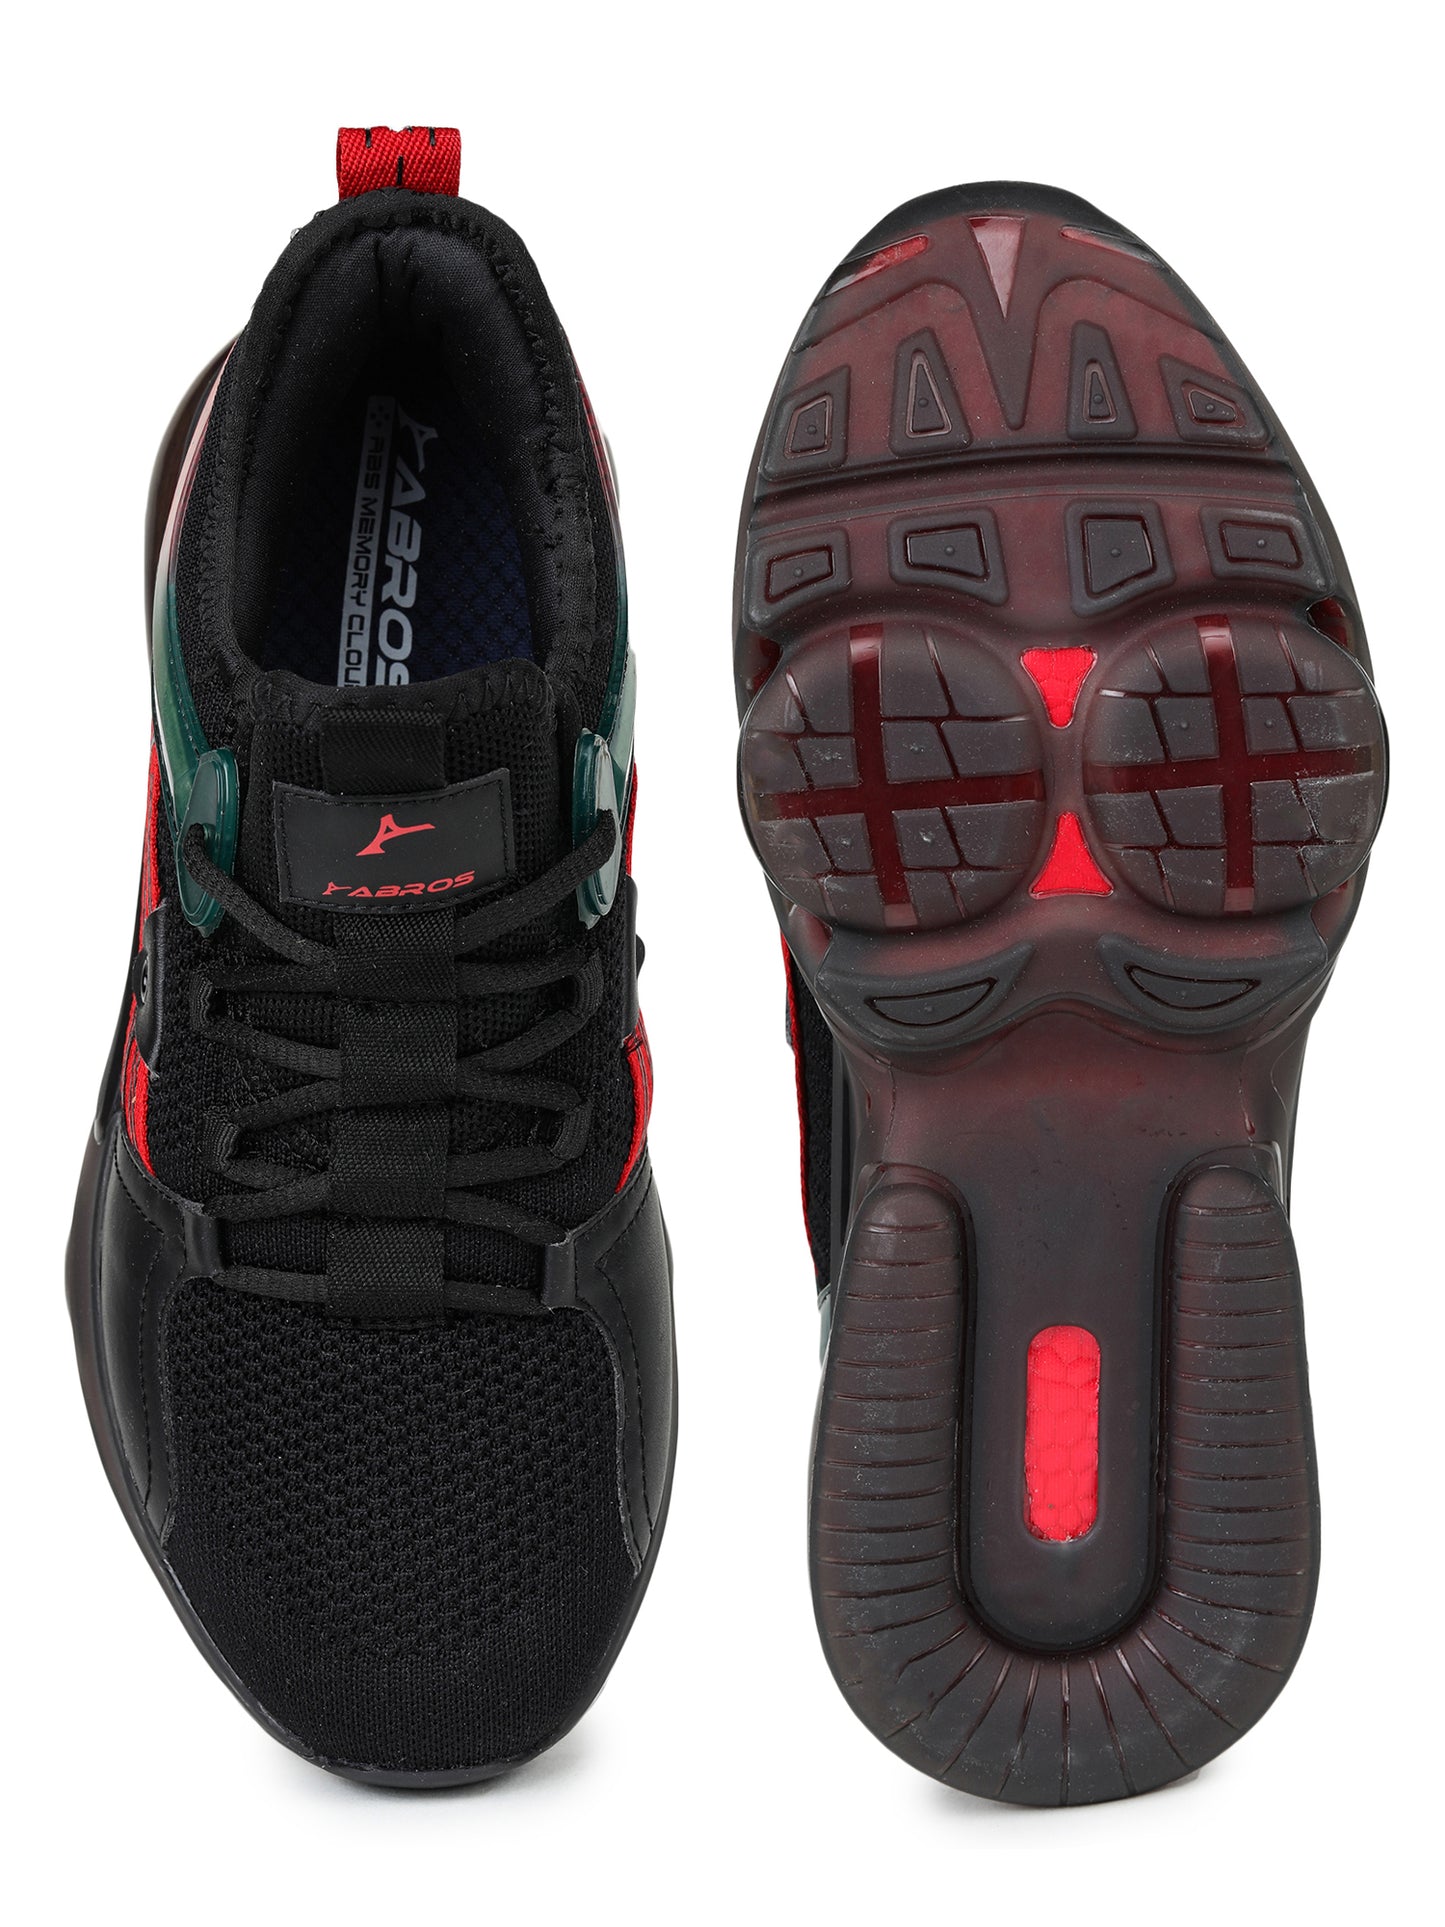 ABROS HULK SPORT-SHOES For MEN'S